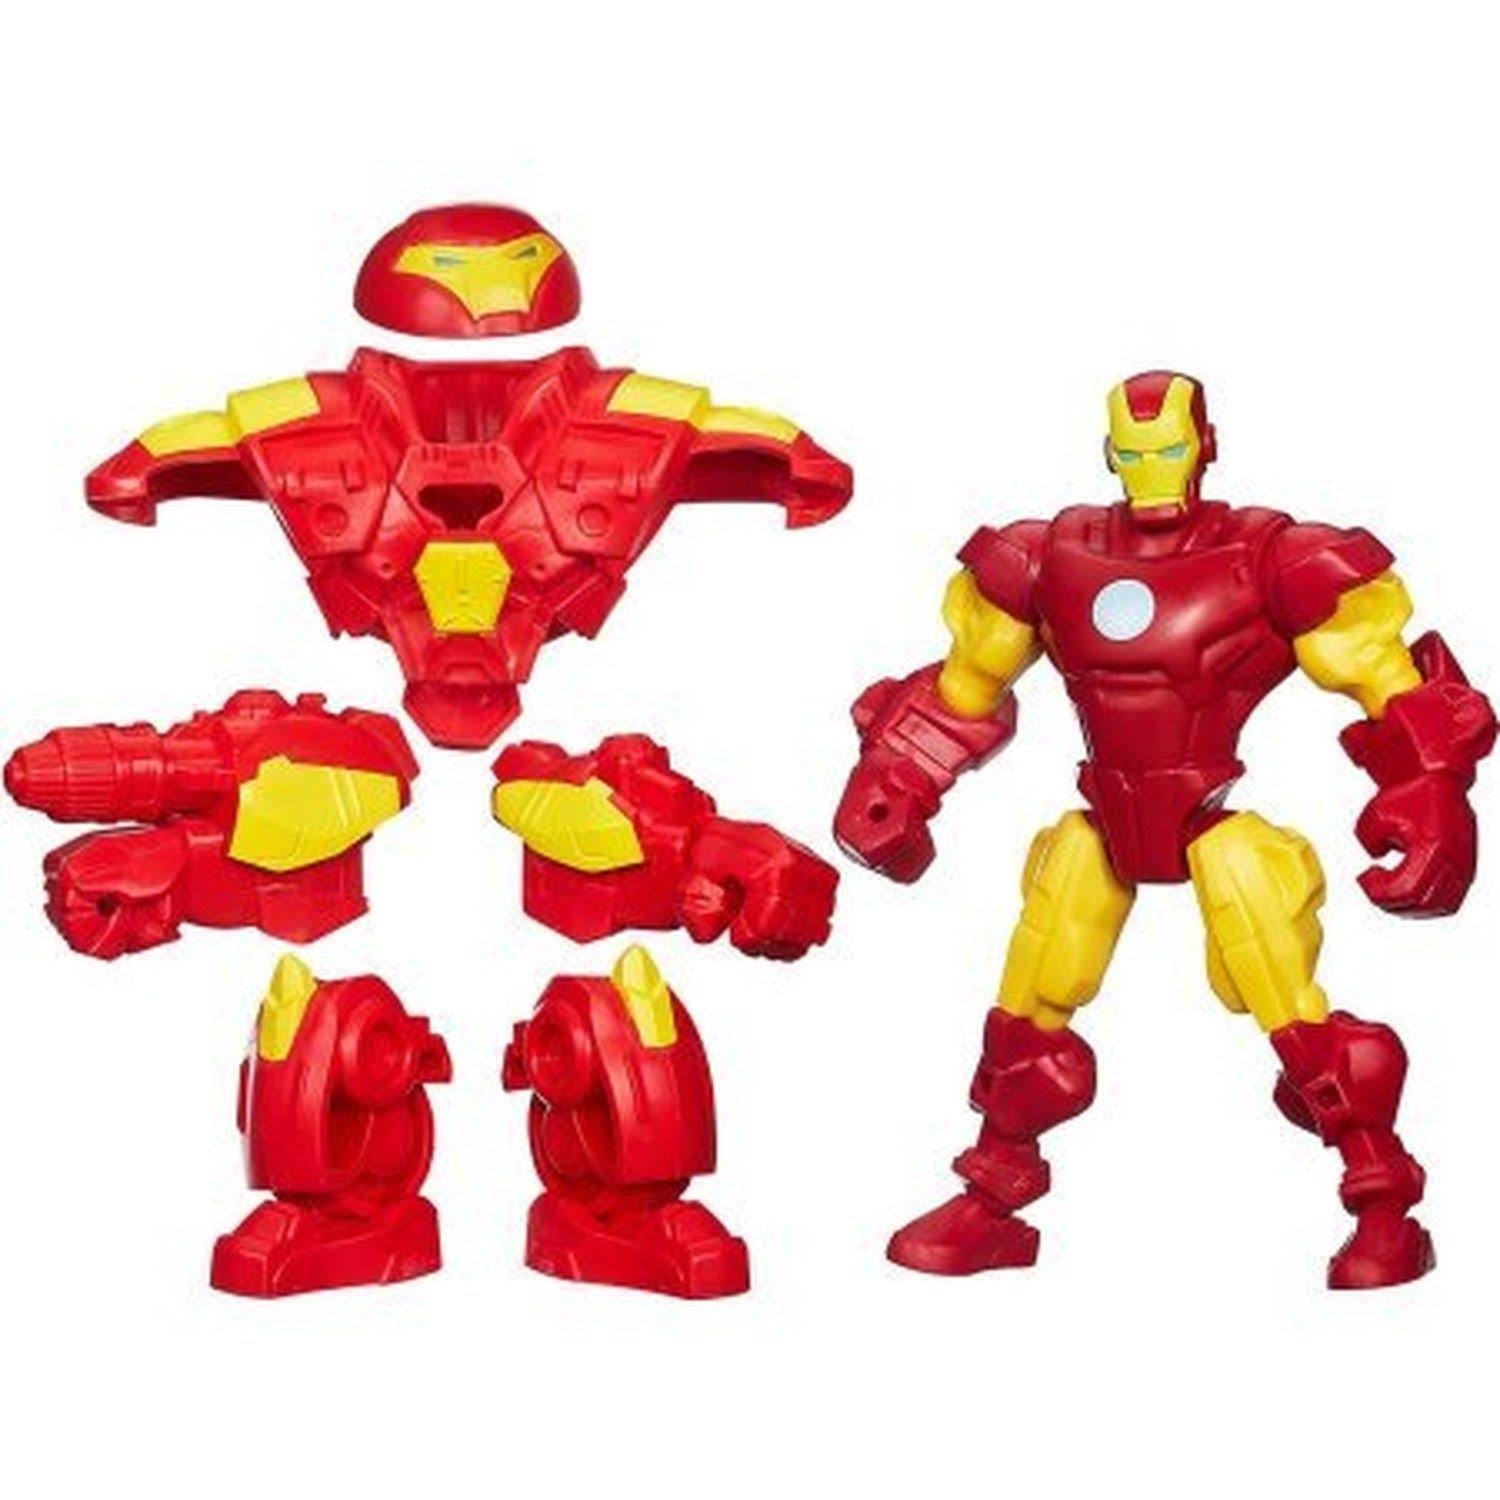 MARVEL MASHER IRON MAN HULK BUSTER and HULK figure set with accessories 